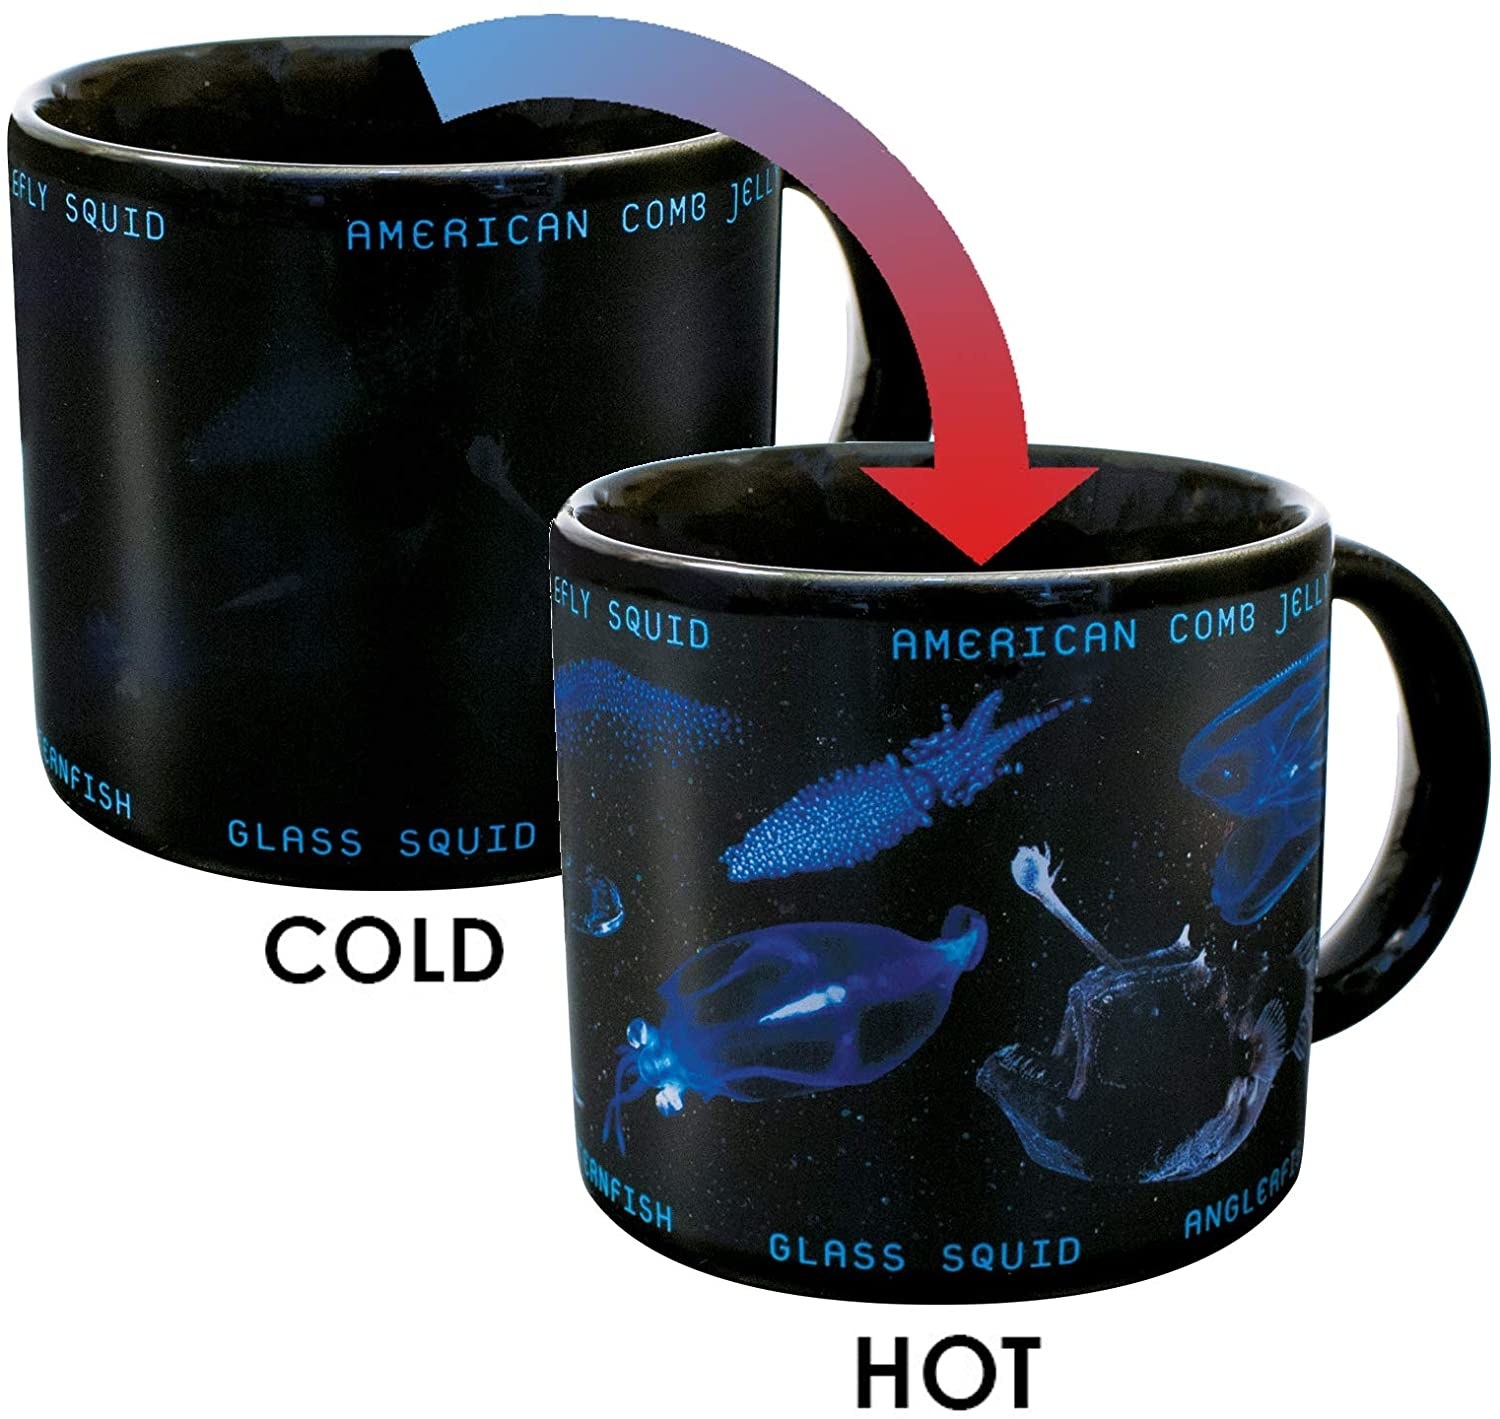 the mug before and after hot water is added to it